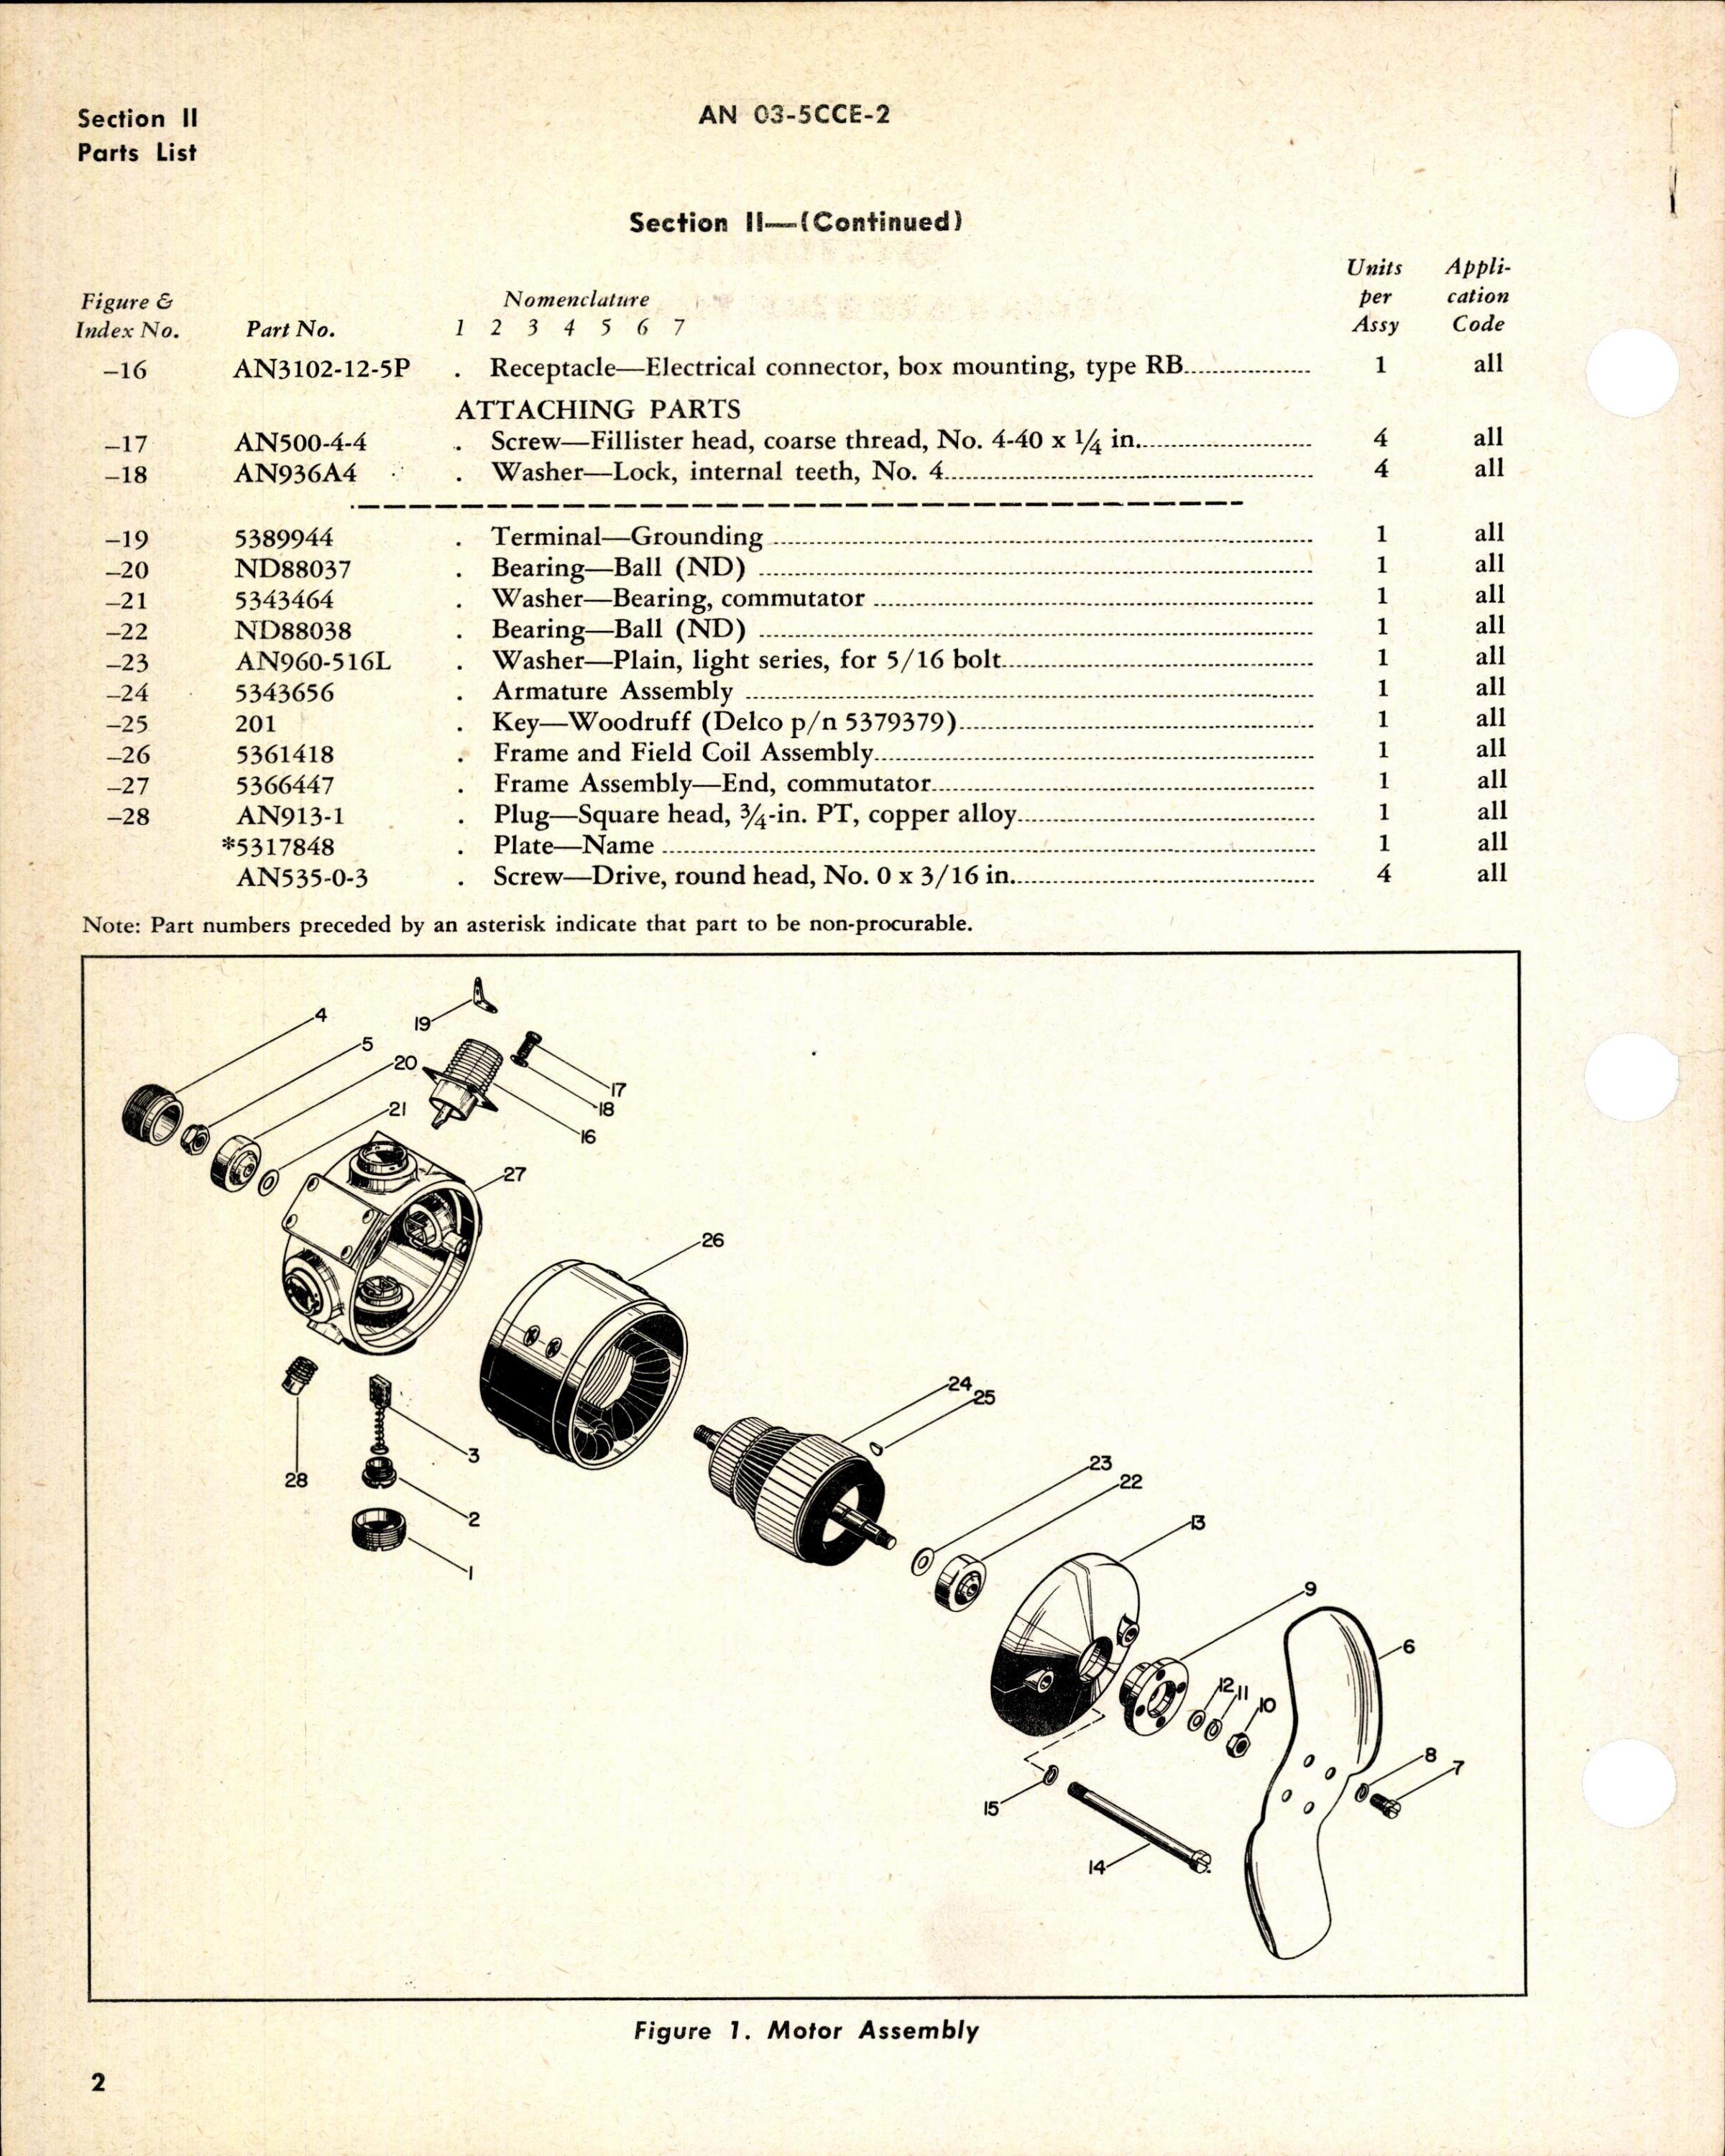 Sample page 4 from AirCorps Library document: Parts Catalog for Delco Electric Defroster Fan Motor Part No. A-7511